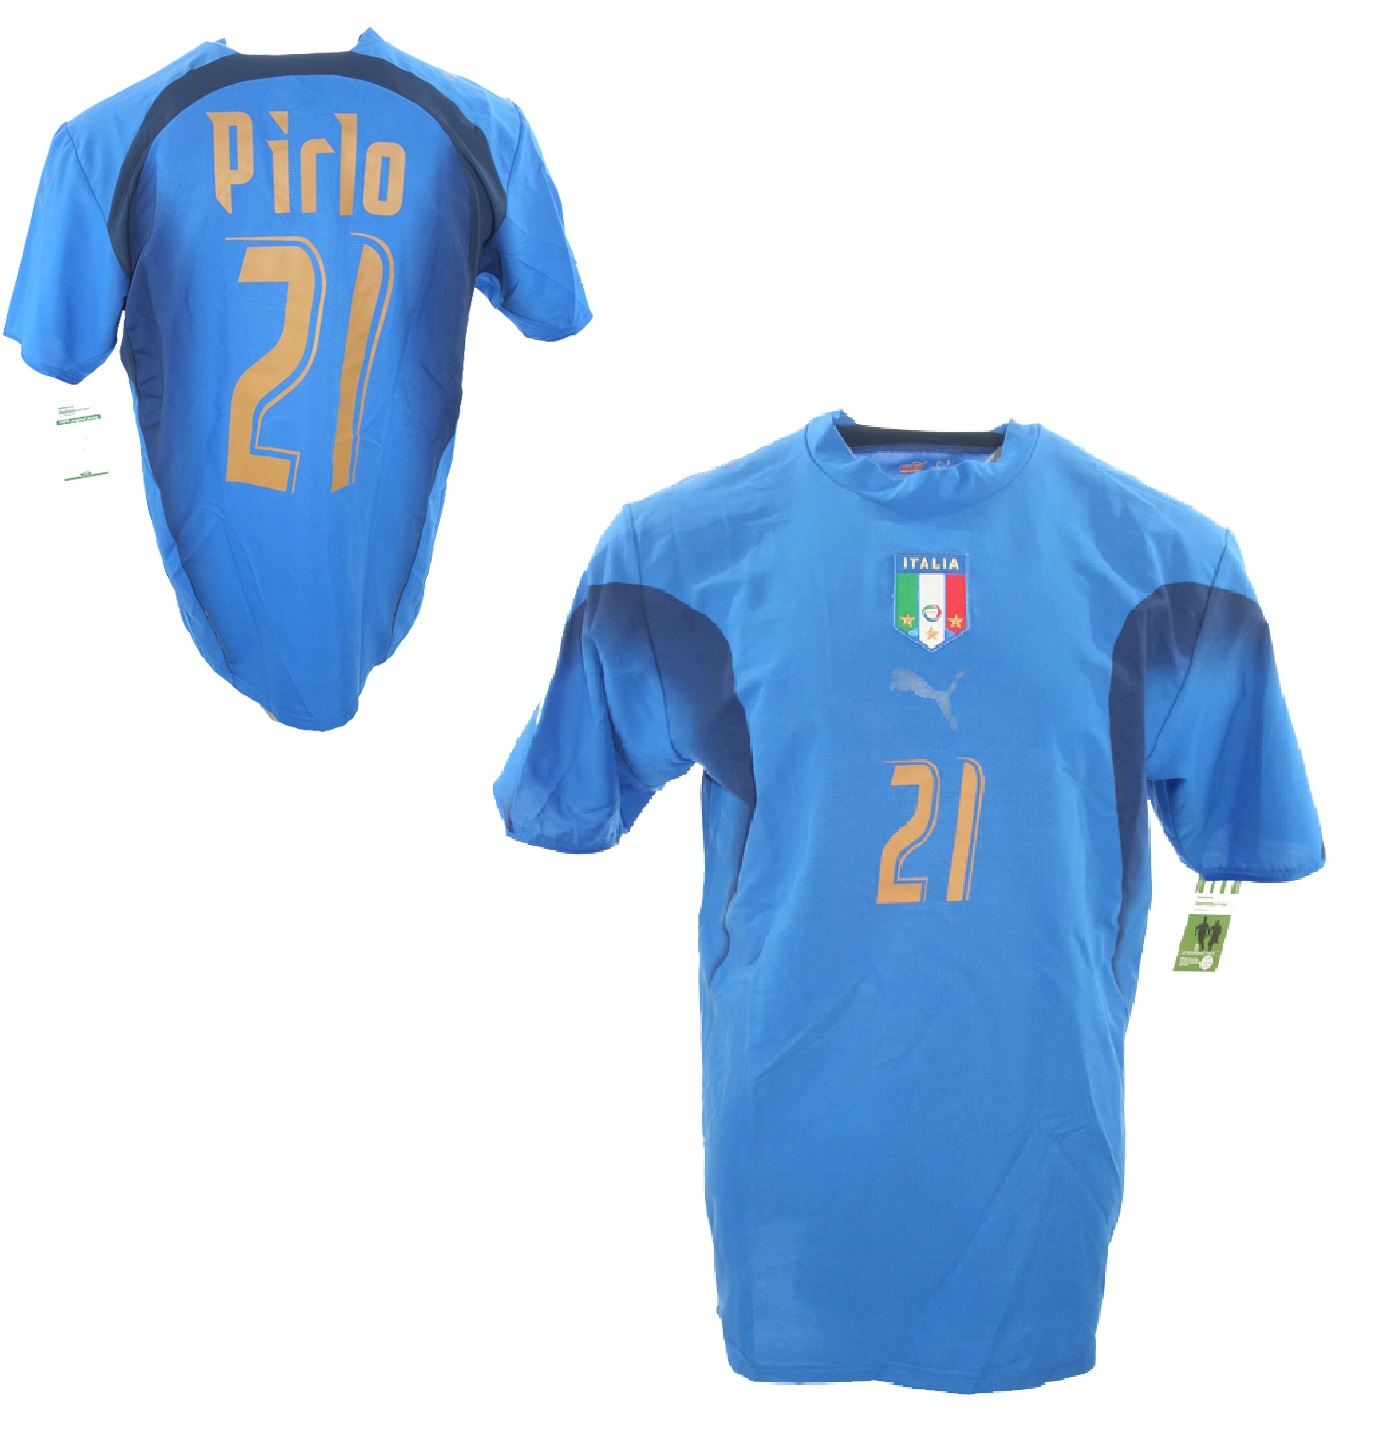 EXTRA LARGE ITALY 2006 HOME X PIRLO 21 